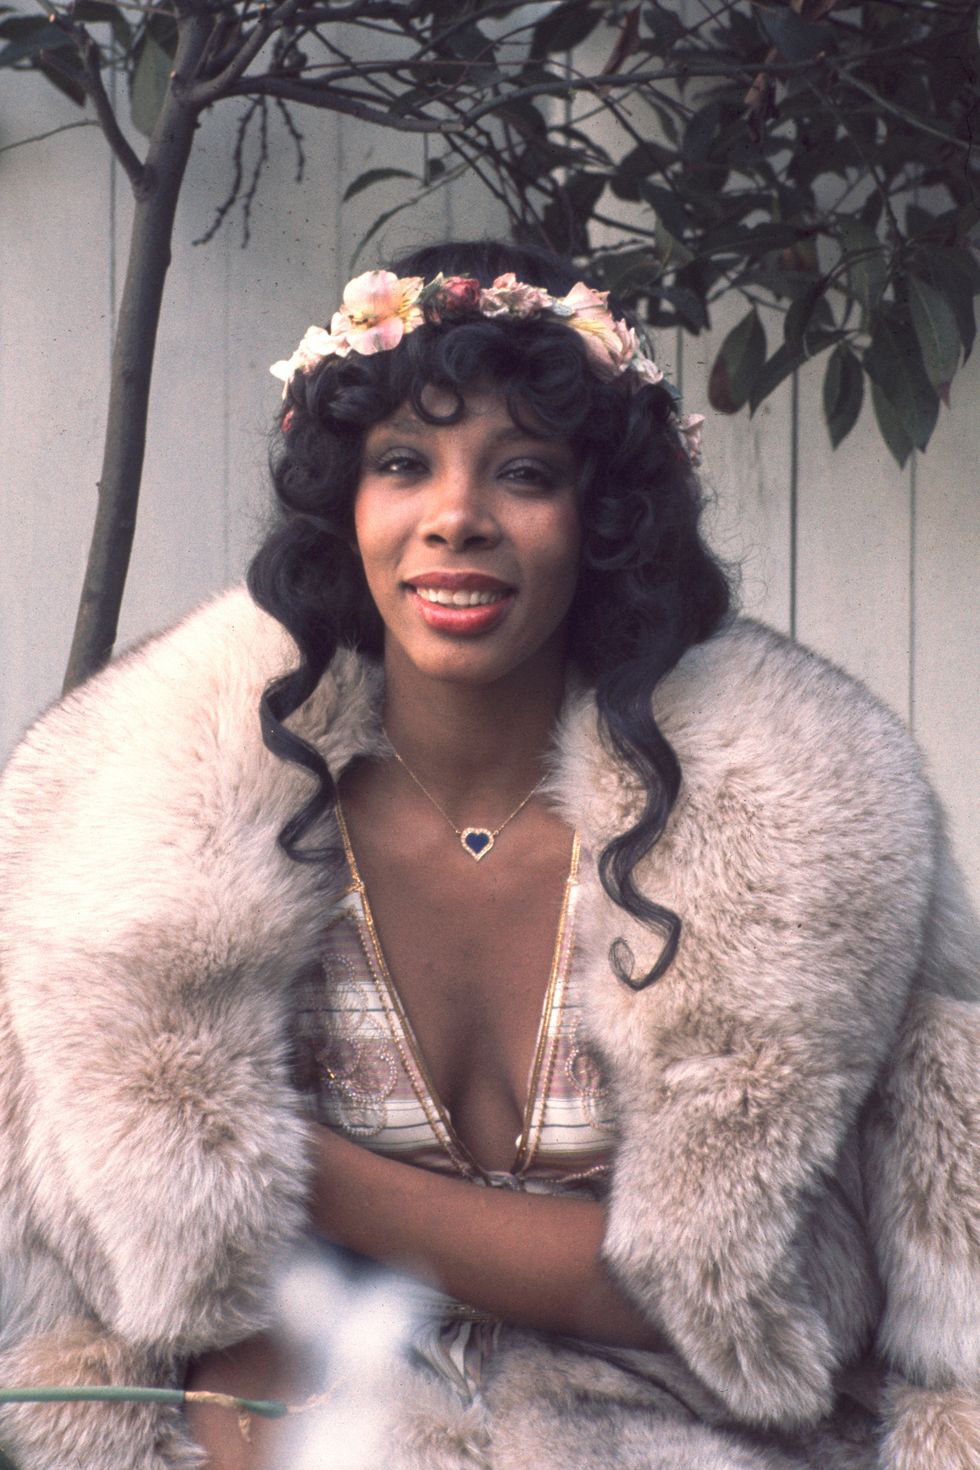 Donna Summer was born on New Year's Eve, 1948, in Boston, Massachusetts, and would become the 'Queen of Disco.'